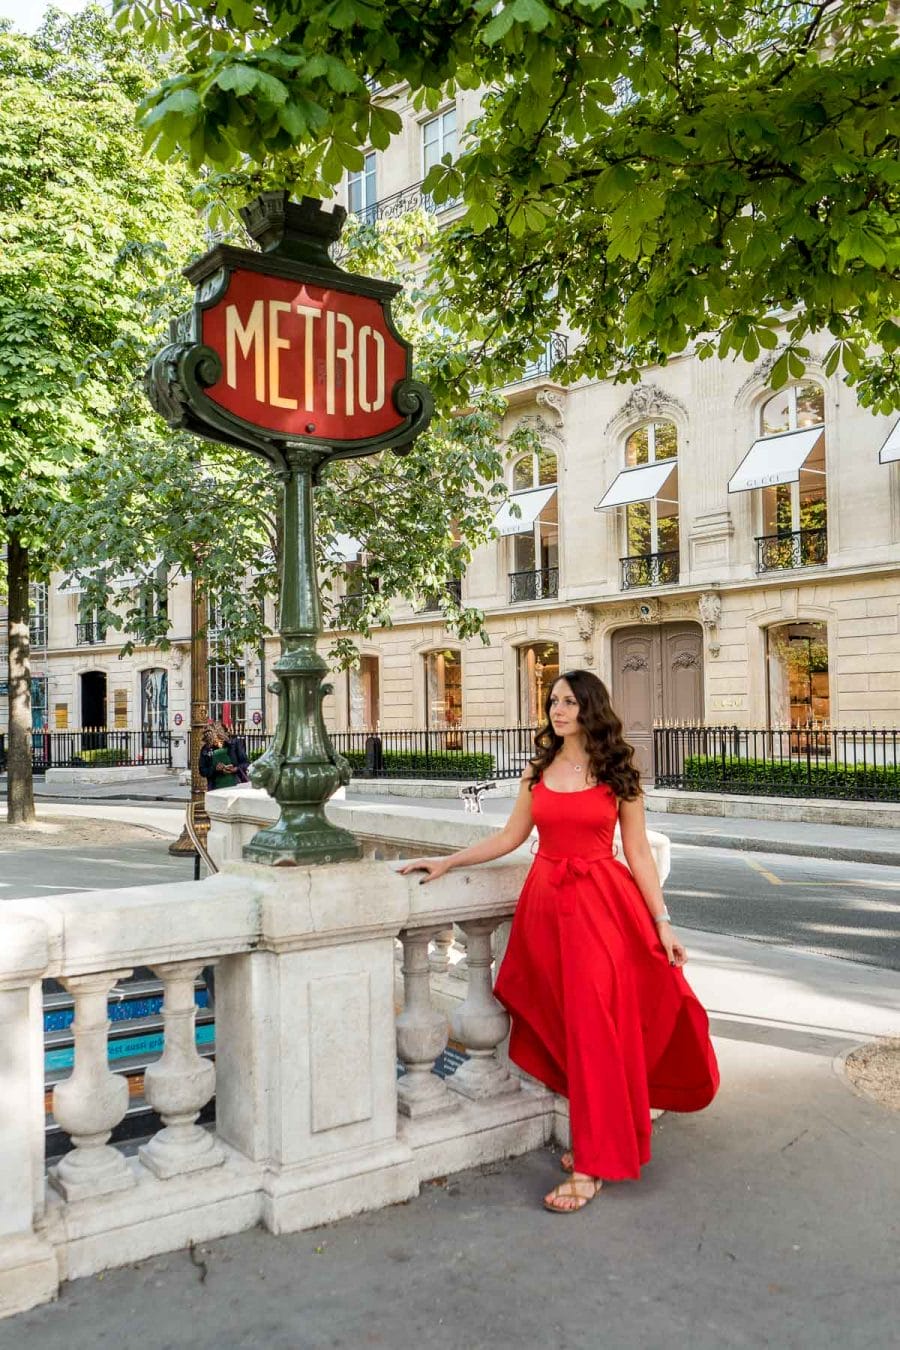 Girl in a red dress standing at a metro station sign in Paris, France